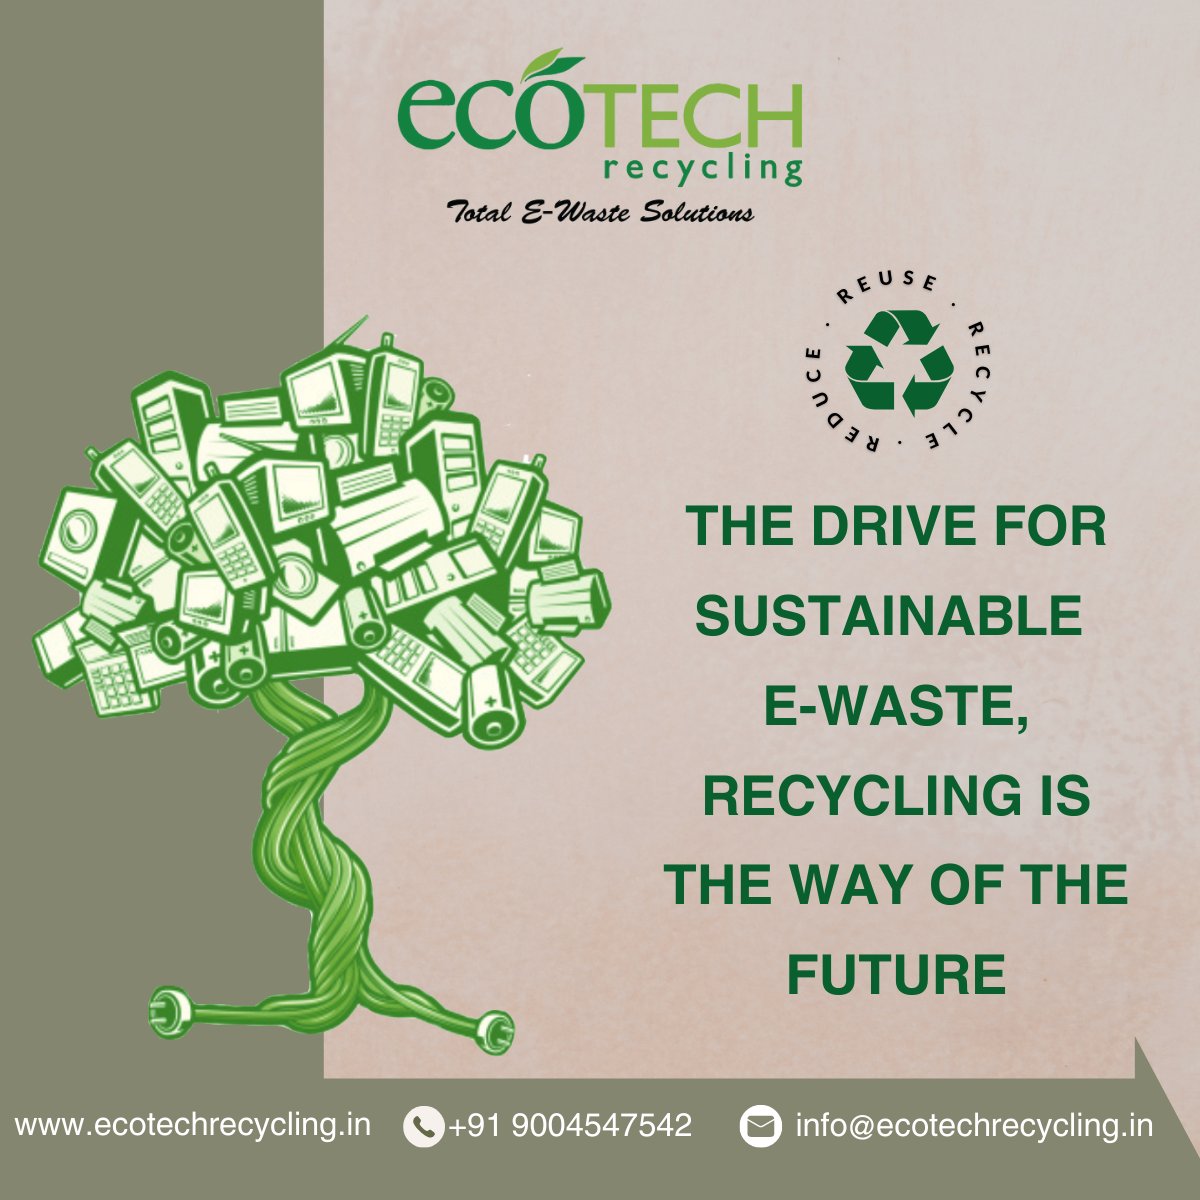 Trash is not the right place, We'll take care of your e-waste ♻️
Be responsible and recycle your e-waste.🌎

#ewaste #recycle #sustainability #ewasterecycling #environment #electronicwaste #escrap #zerowaste #reuse #wastemanagement #itrecycling